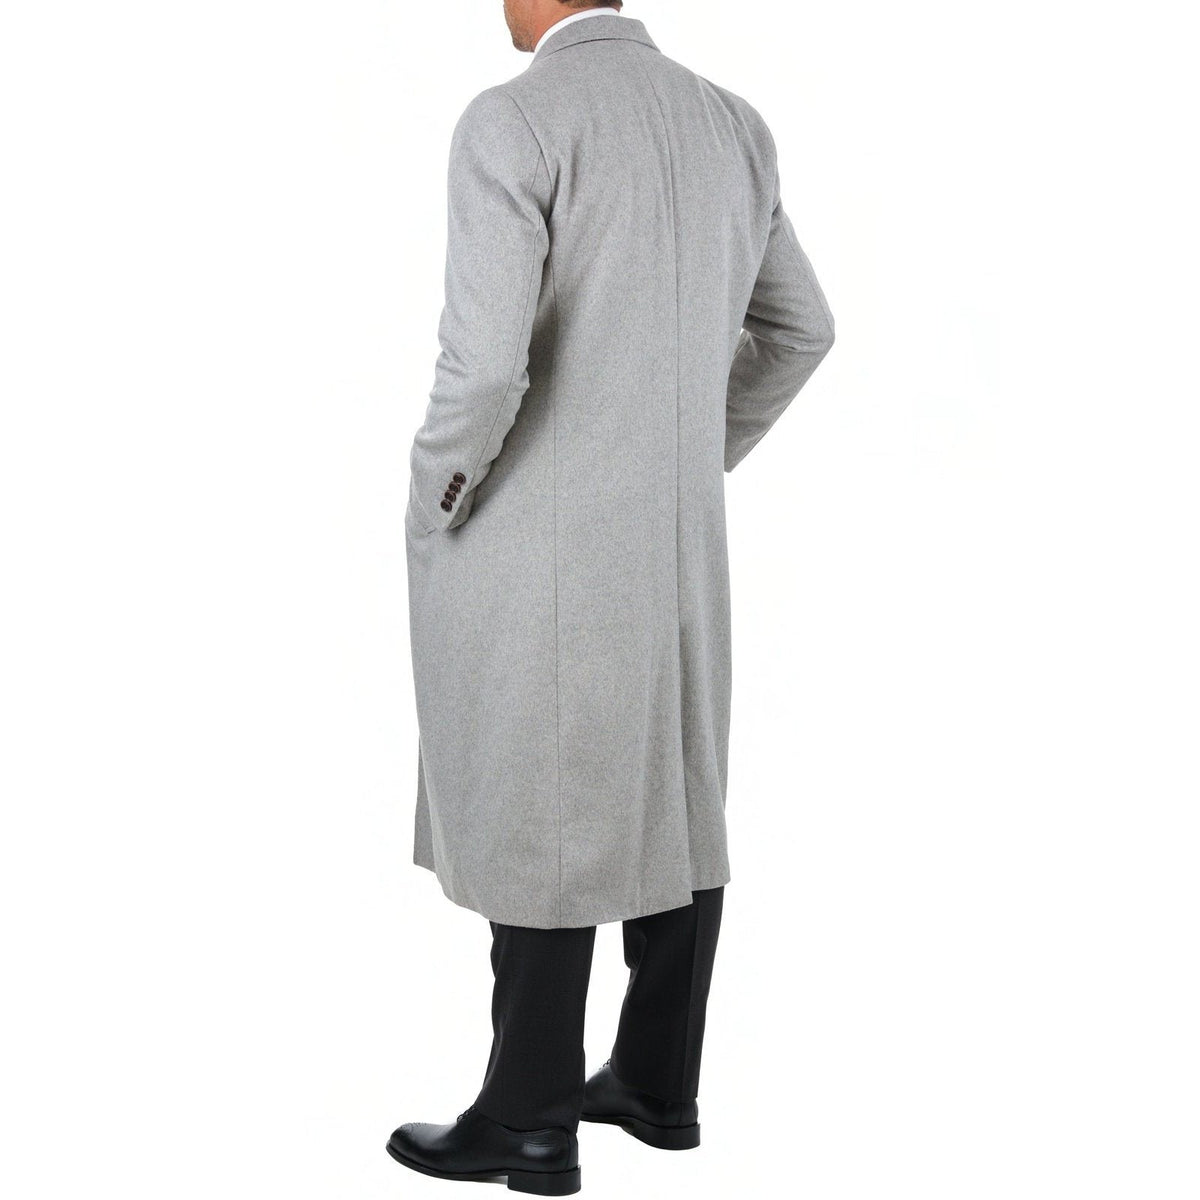 Label E OUTERWEAR Mens Regular Fit Solid Light Gray Full Length Wool Cashmere Overcoat Top Coat